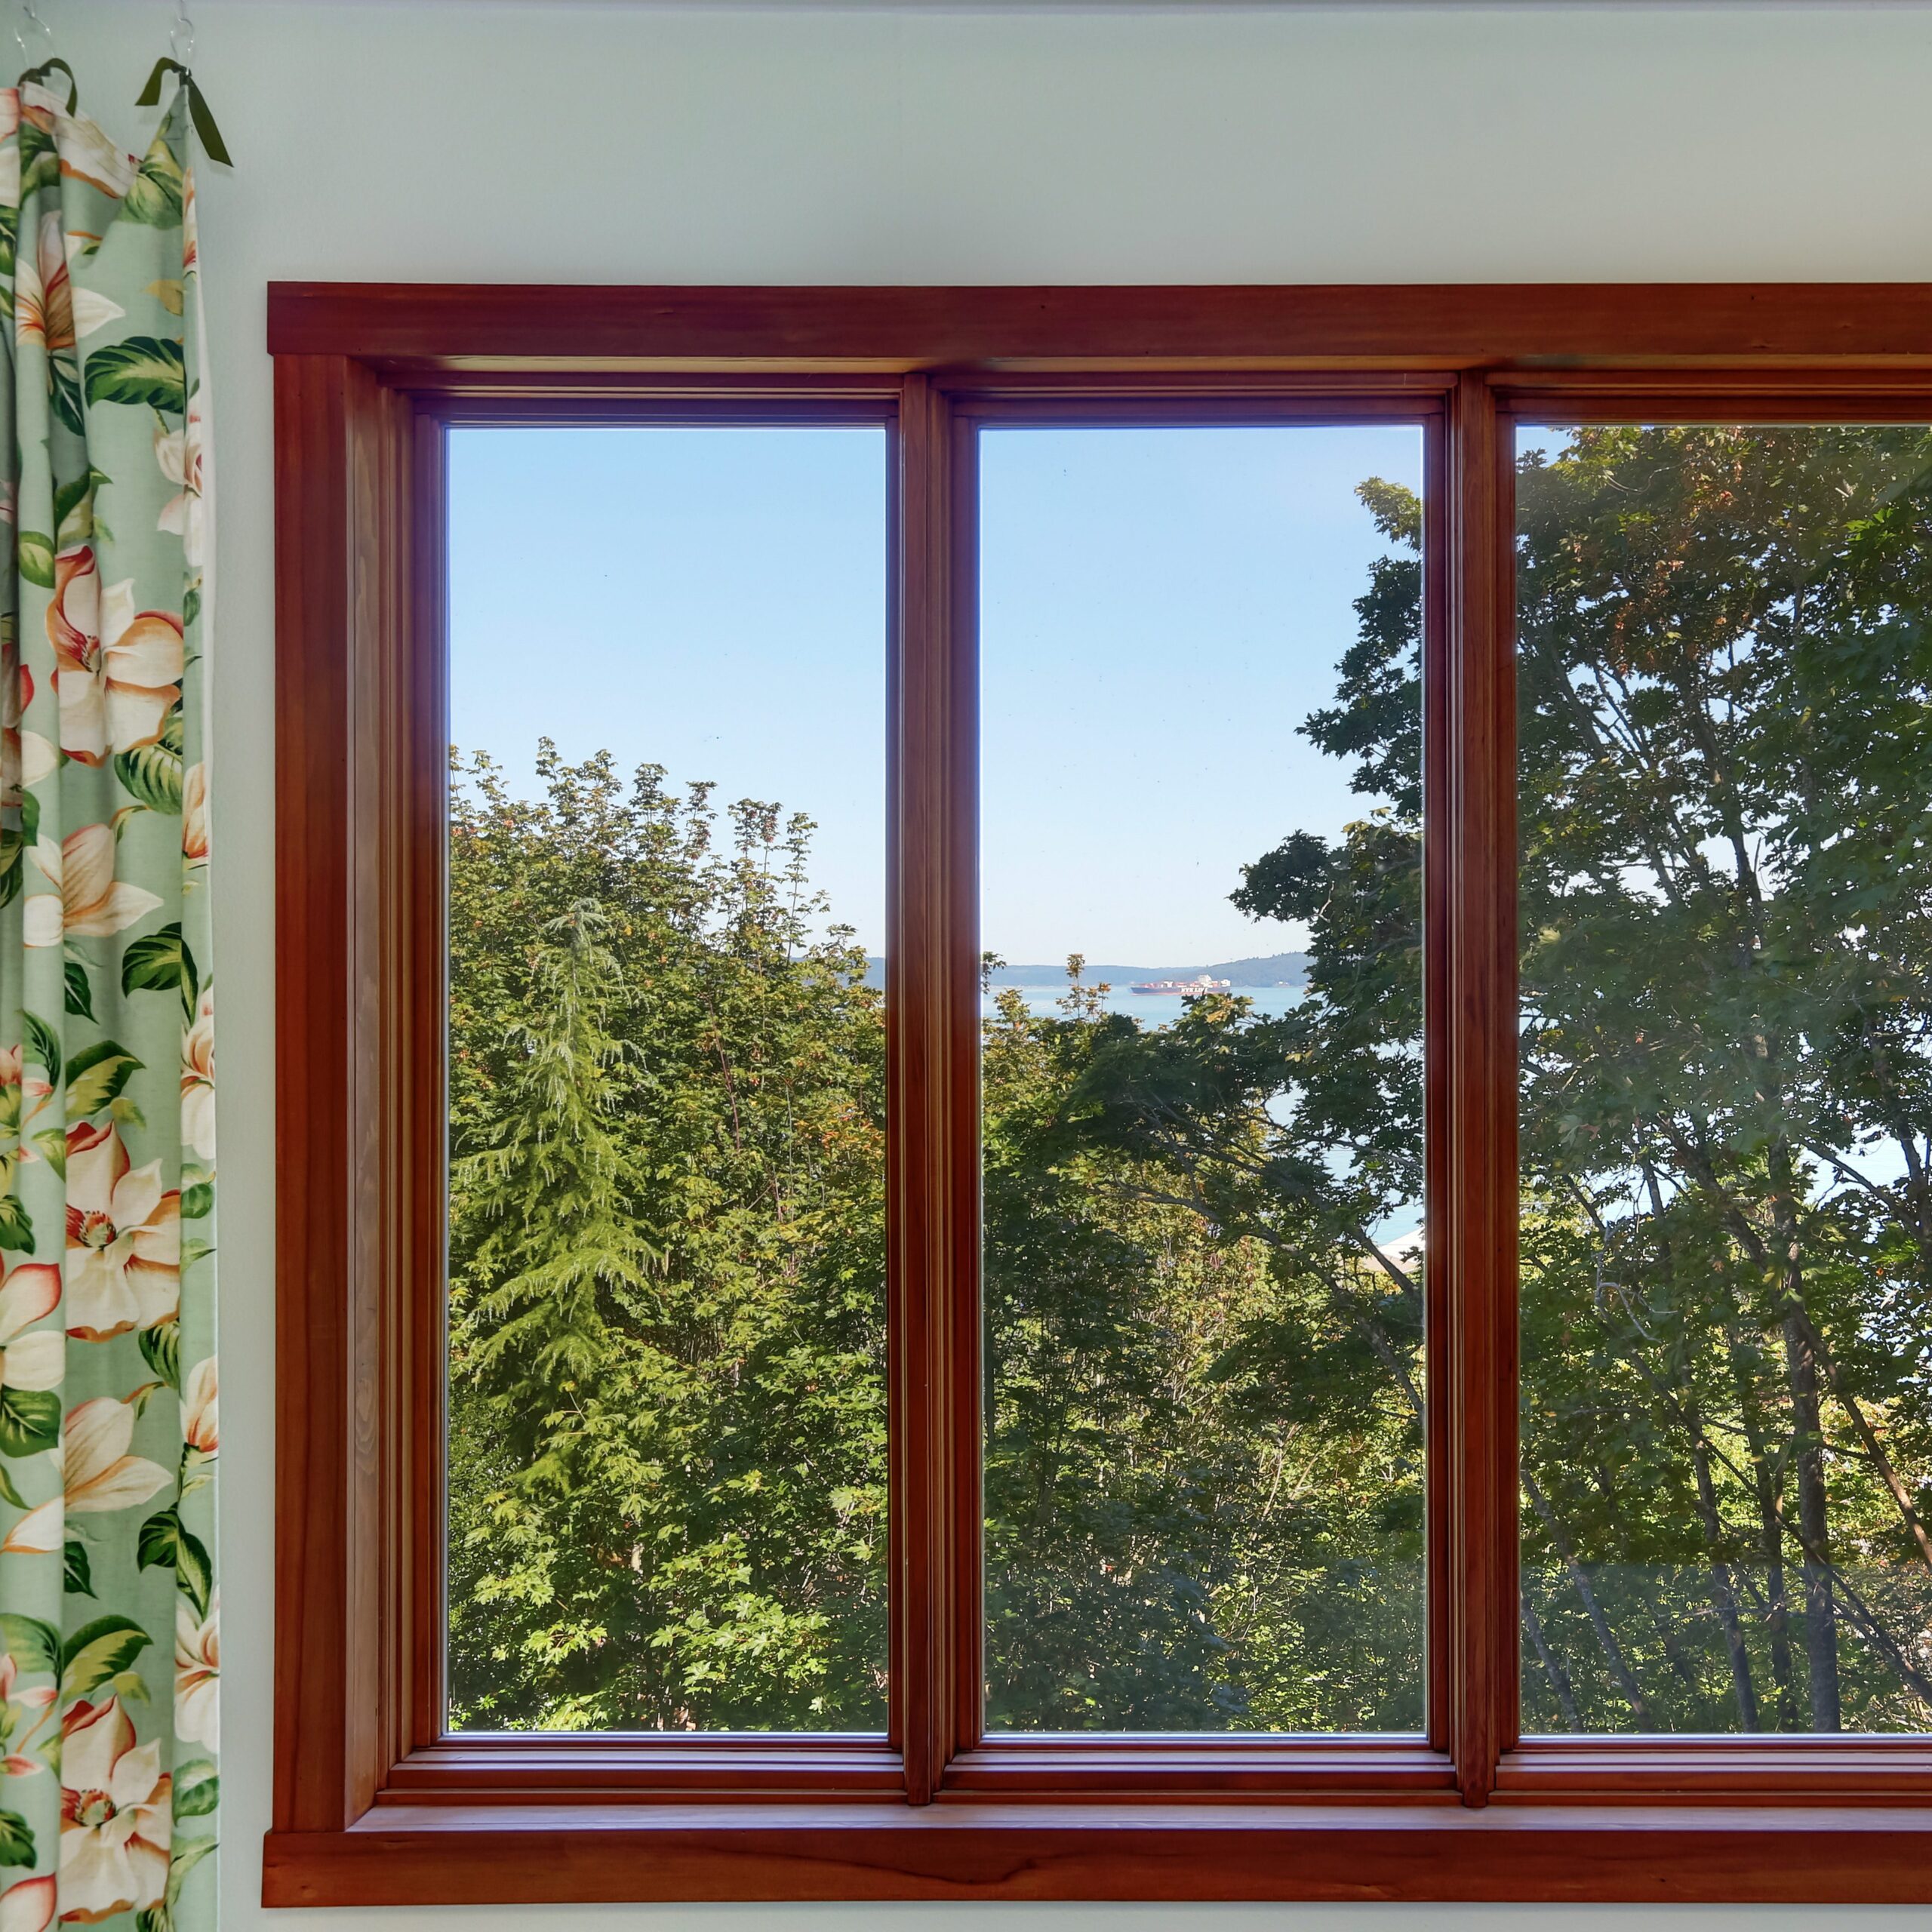 A picture window with a view of the outside.